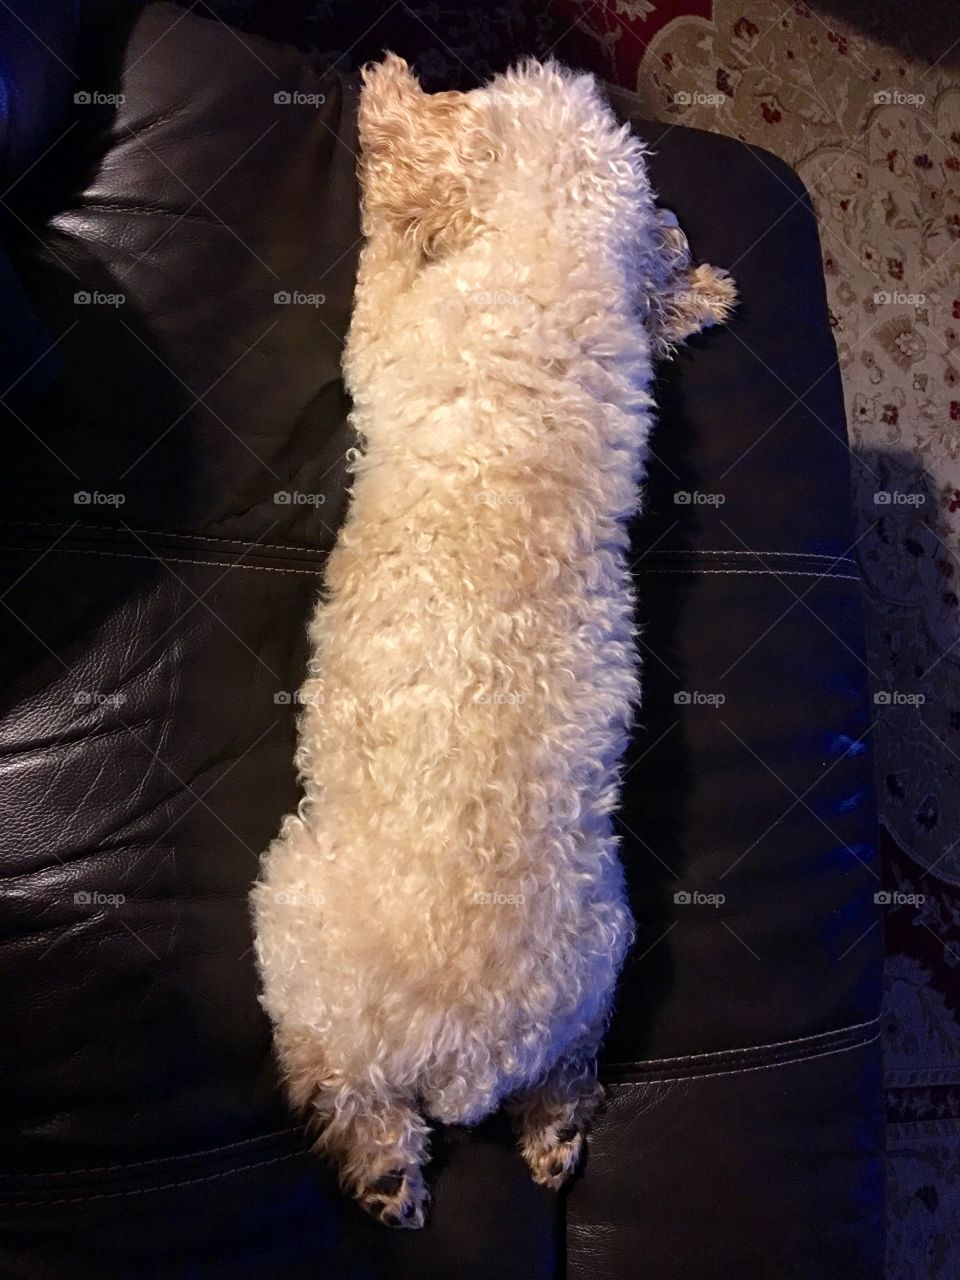 Poodle Stretched Out On Stomach On My Recliner Footrest

This is how my apricot poodle stretches out at my feet. He puts his back legs out straight so you can see the pads of his back feet. They look so cute!